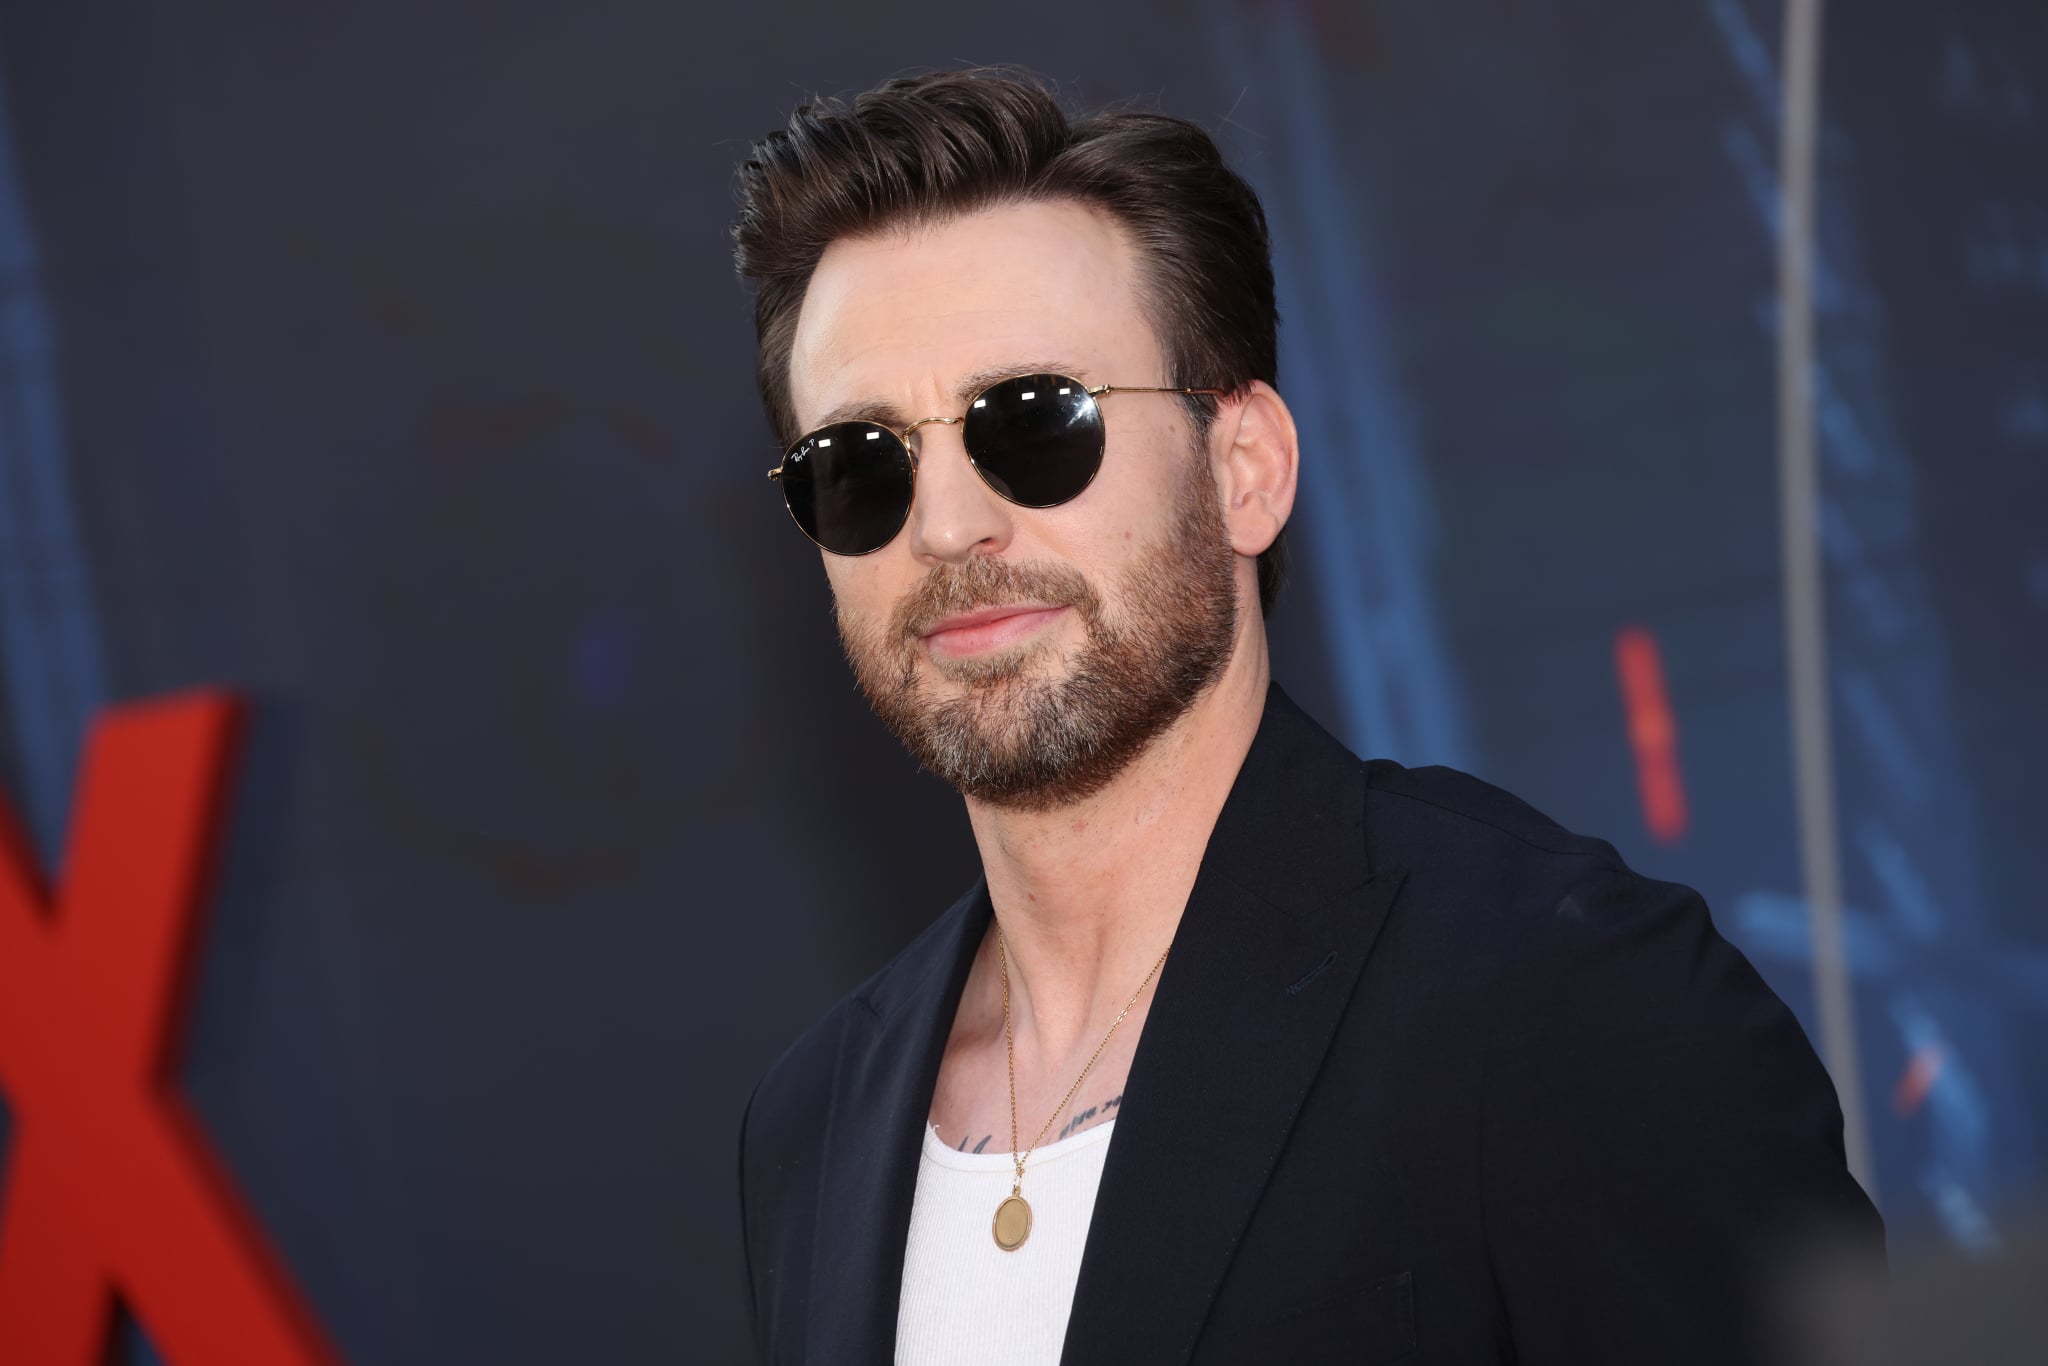 HOLLYWOOD, CALIFORNIA - JULY 13: Chris Evans attends the world premiere of Netflix's 